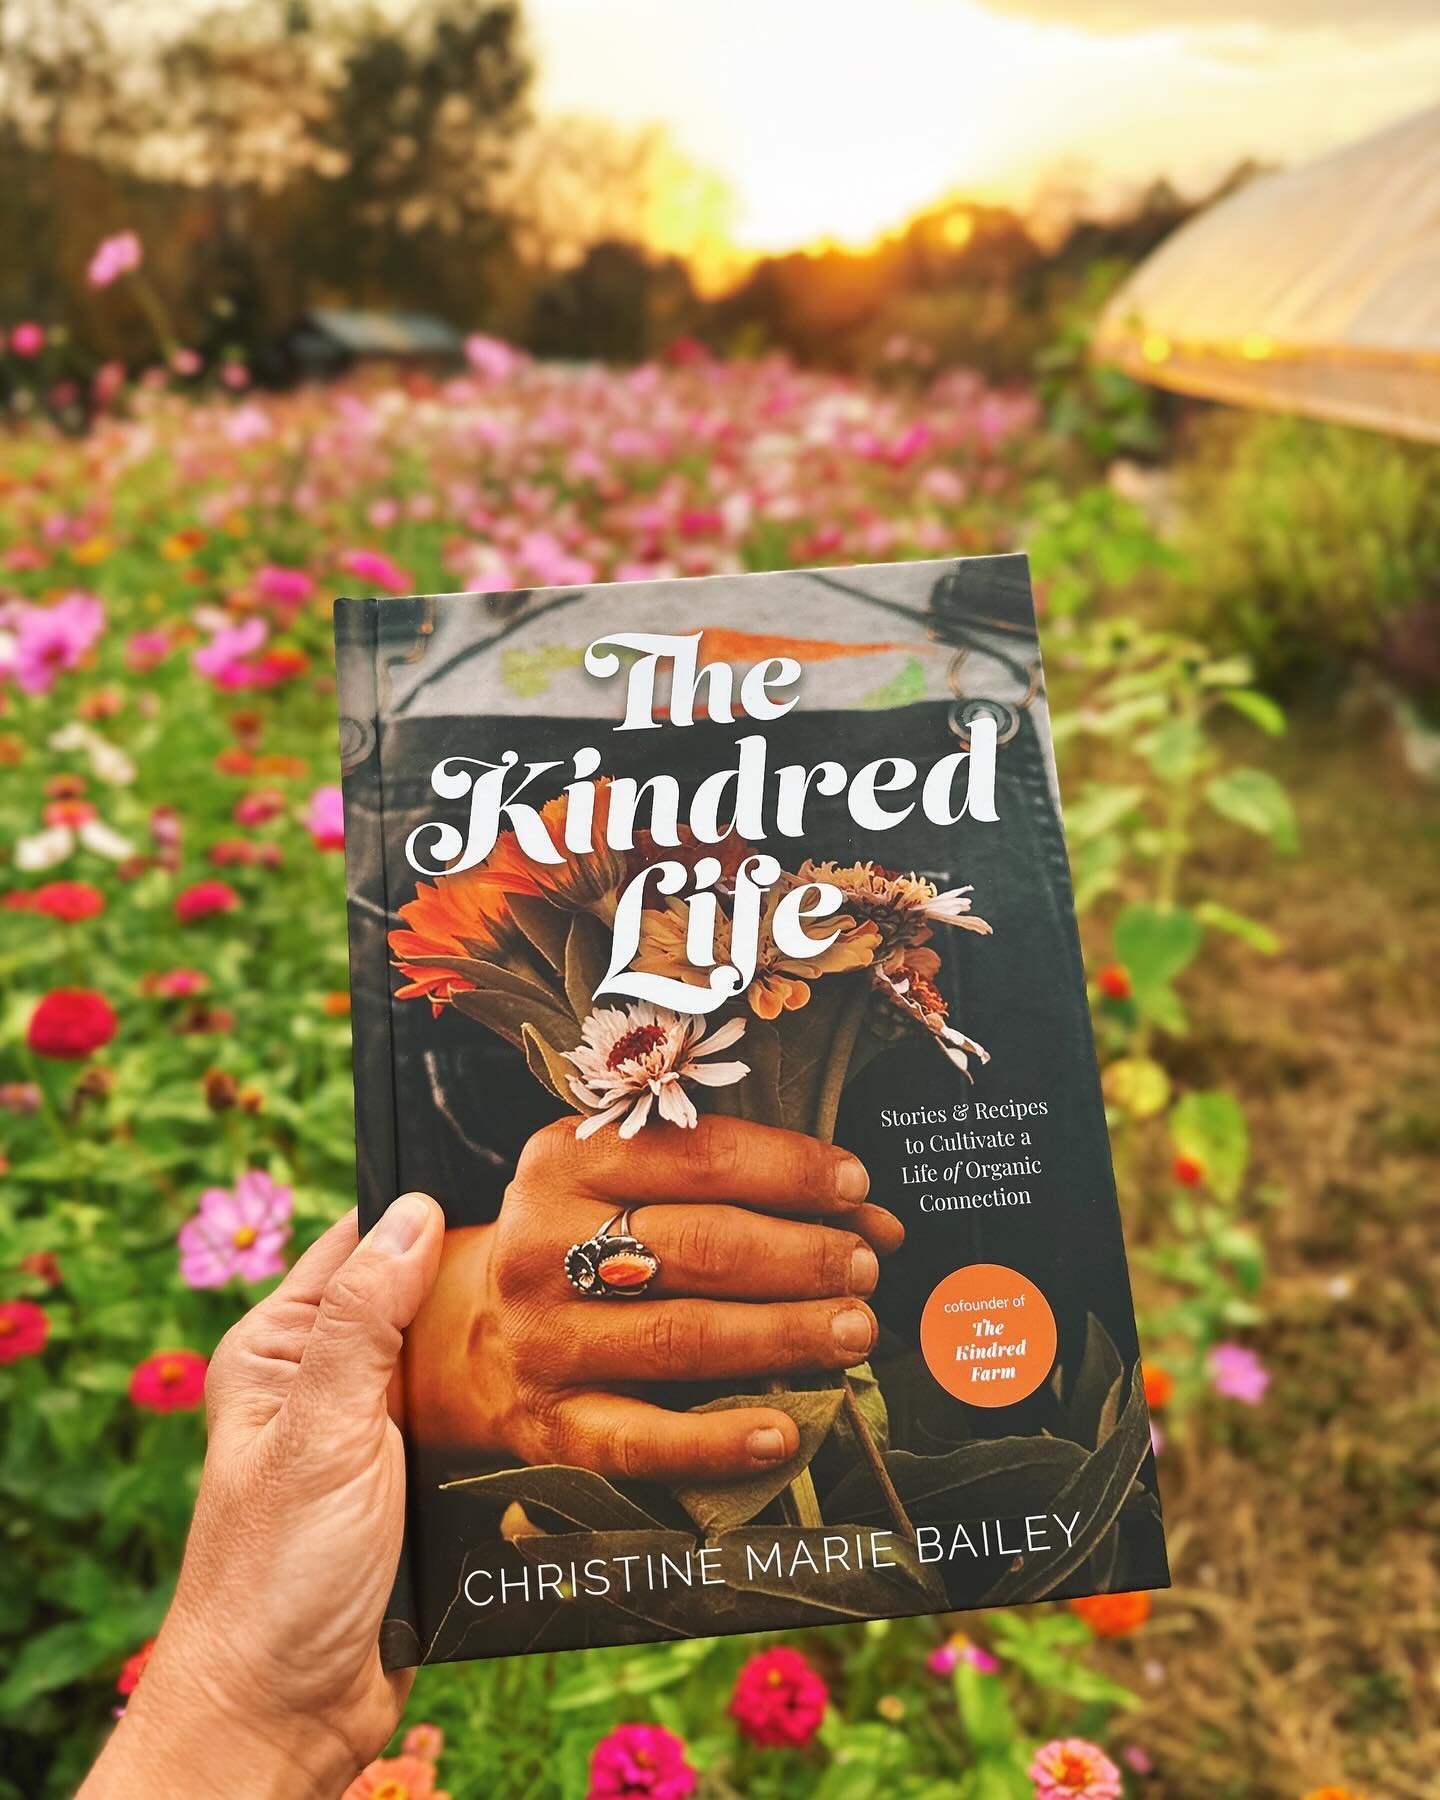 There is a Greater Story that is written in the sky, in the soil, and in us.  It&rsquo;s spring, and now is a great opportunity&nbsp;to grab a copy of&nbsp;#thekindredlifebook&nbsp;and be inspired to grow something - a plant, a plan, a dream.&nbsp;

